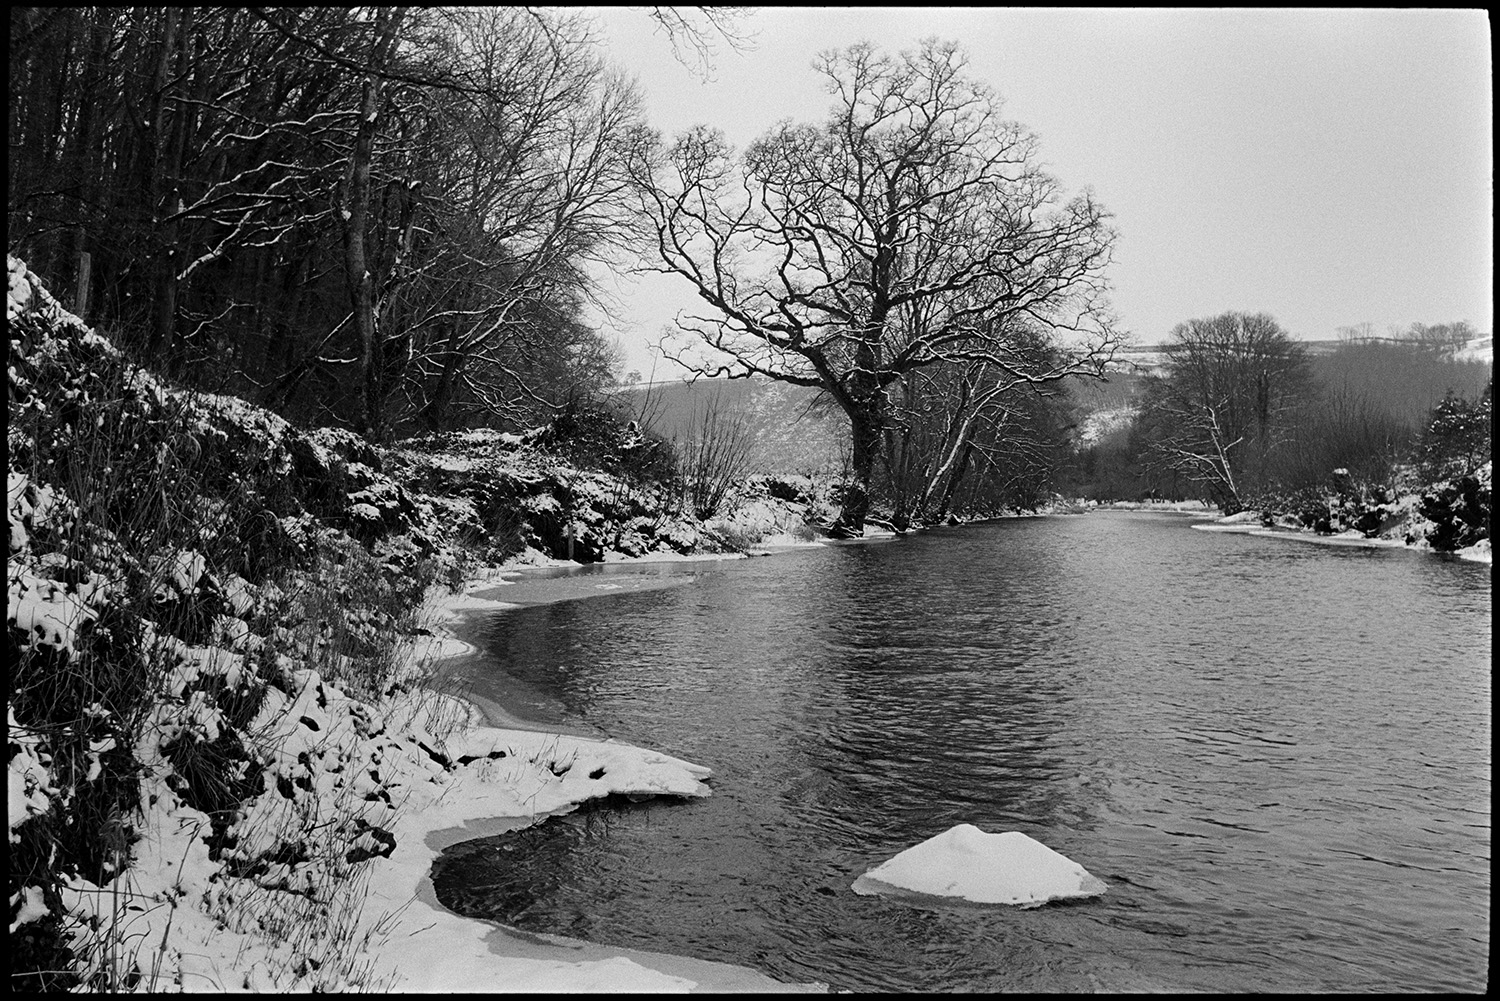 Snow, river and wood.
[River Torridge in winter with snowy banks and view of trees lining the river, at Halsdon, Dolton.]